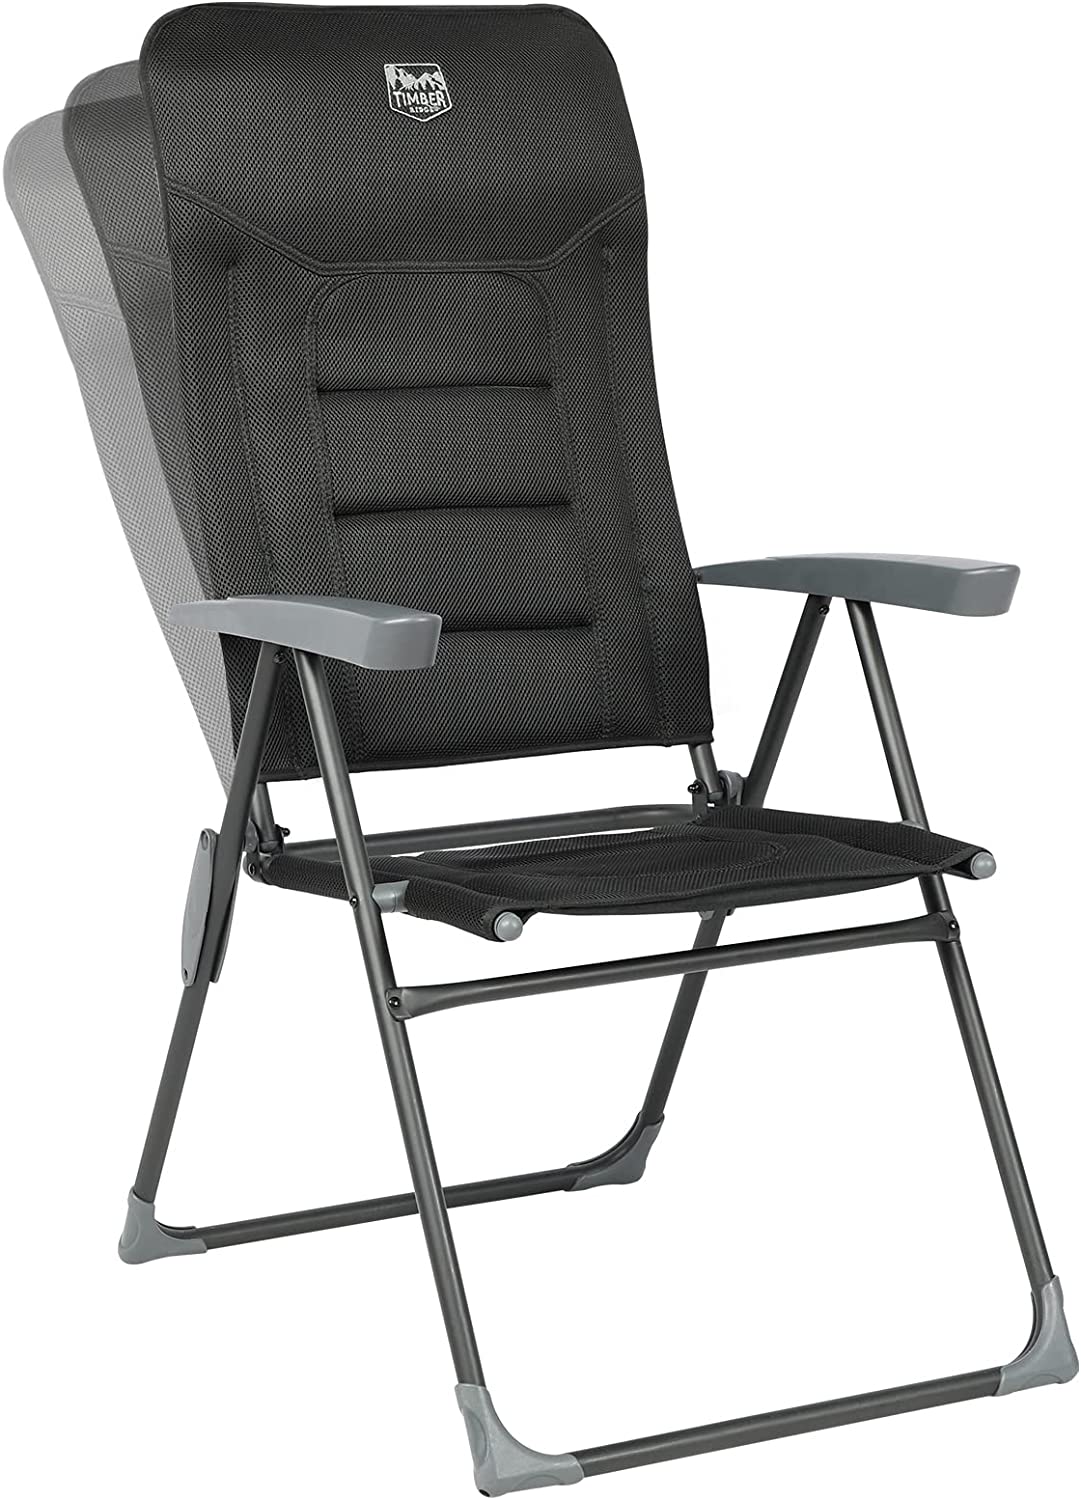 High Back Folding Camping Chair with 7-Level Adjustable Backrest, Foldable Reclining Patio Chair, Lightweight Aluminum Lawn Chair, Padded Outdoor Chair for Backyard, Deck, RV, Porch - image 1 of 8